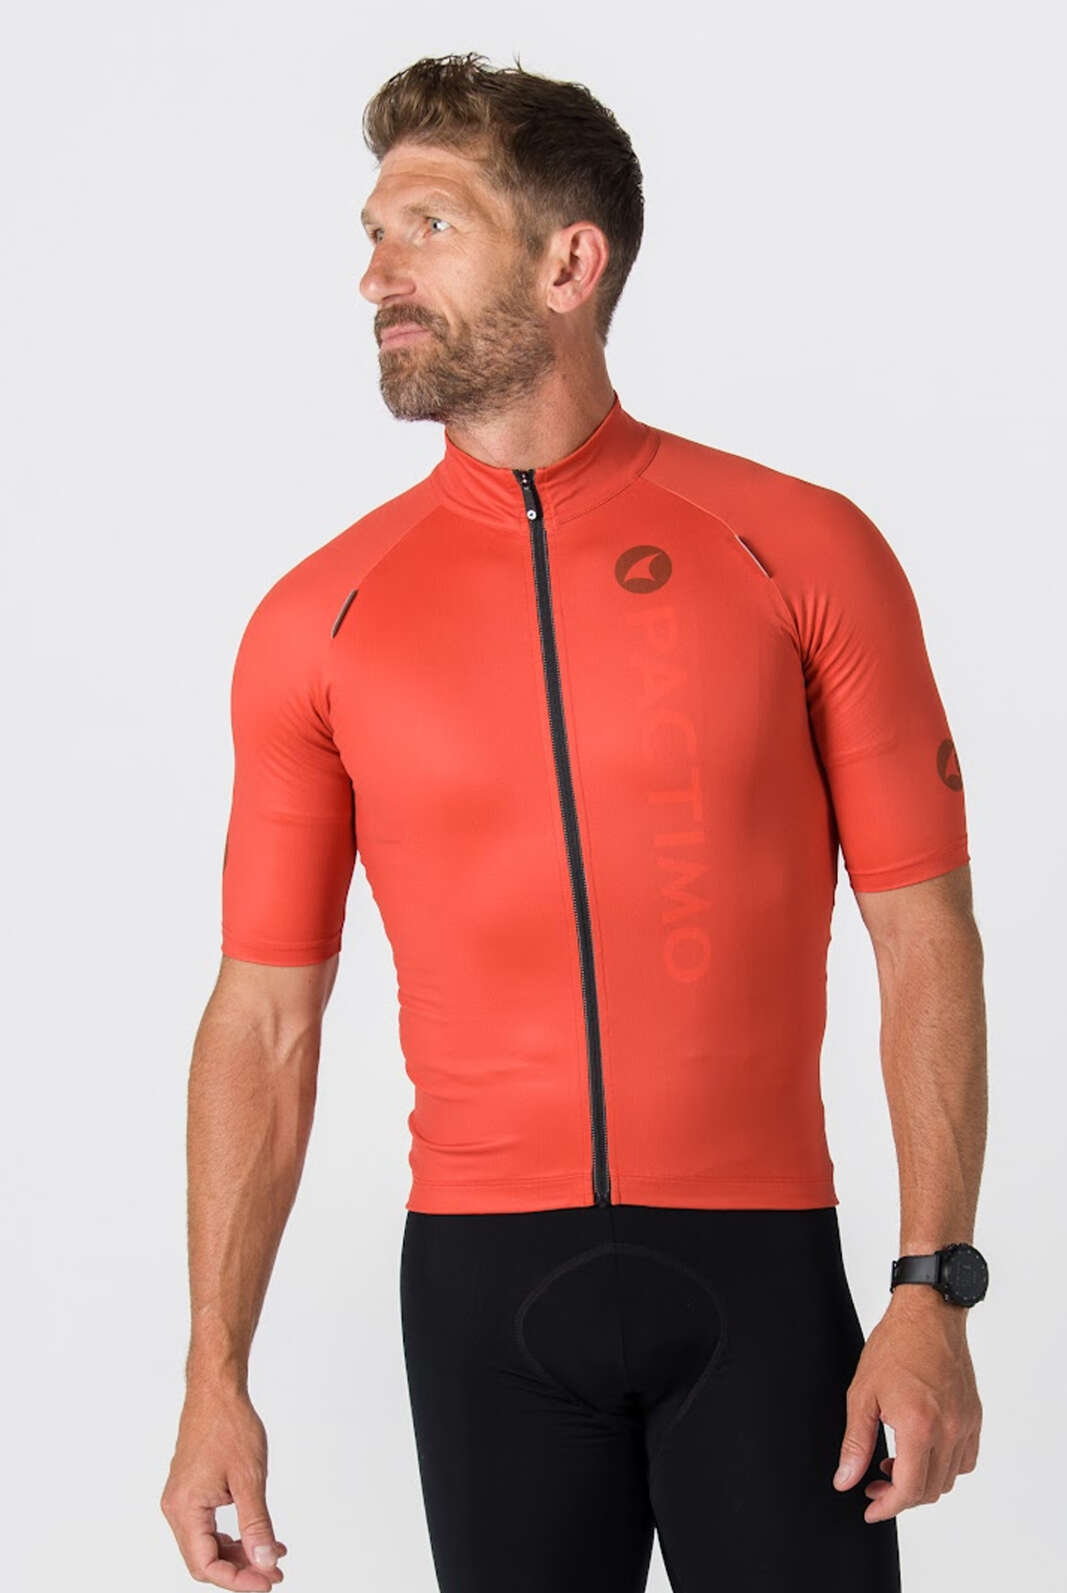 Men's Red Water Resistant Cycling Jersey - Front View